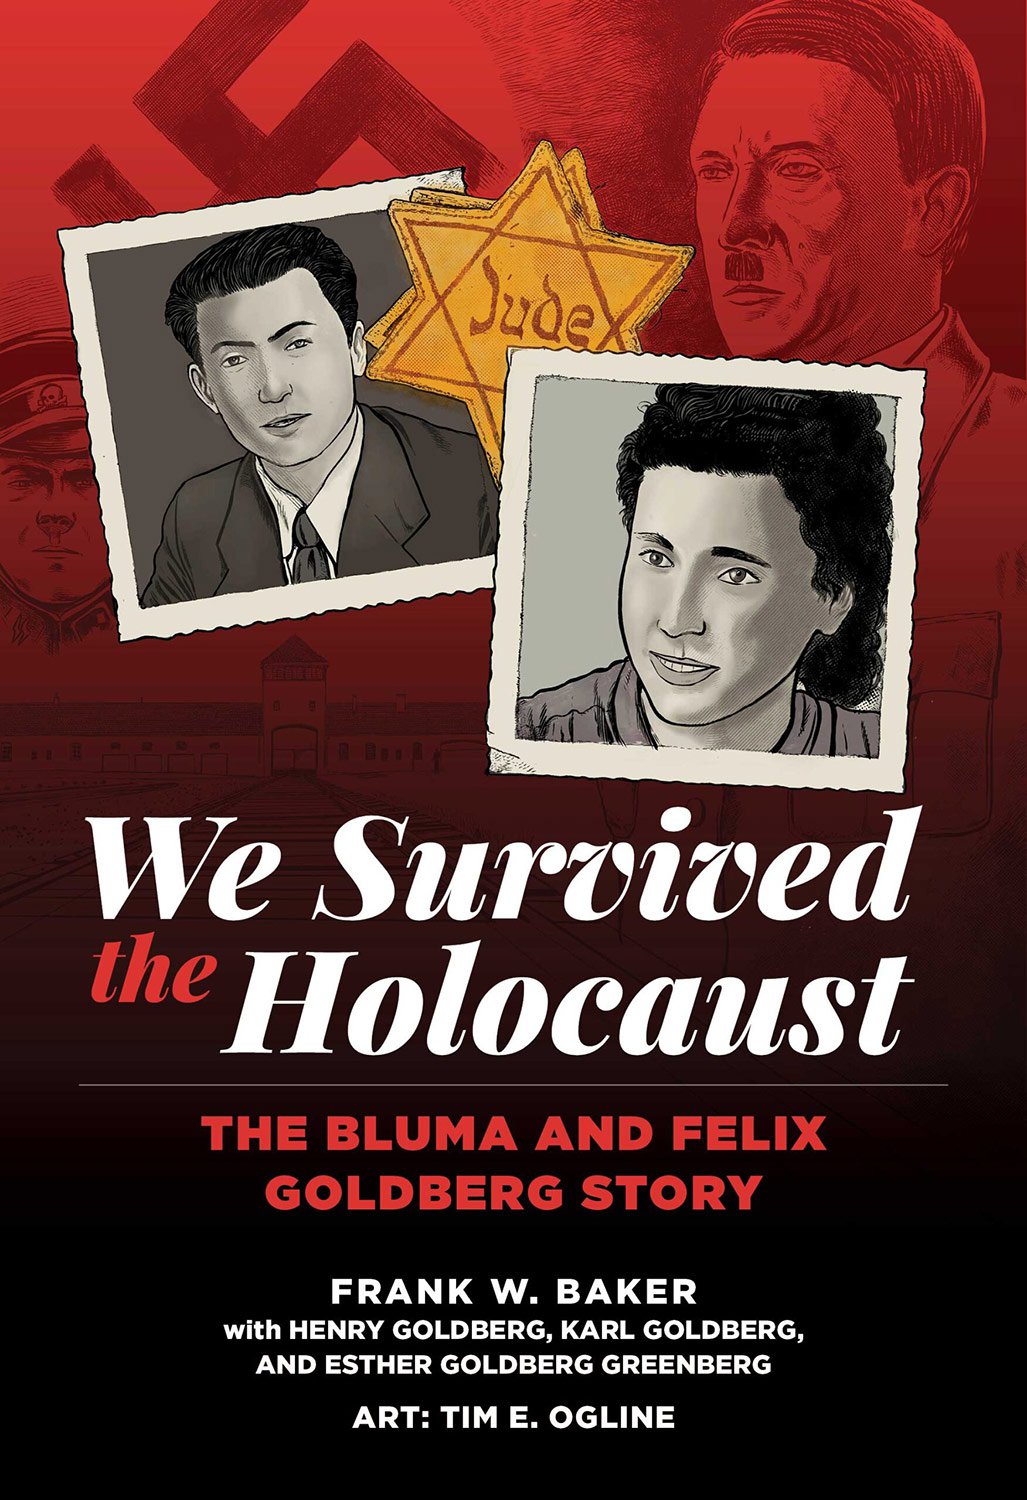 Drawing Conclusions from ‘We Survived the Holocaust’